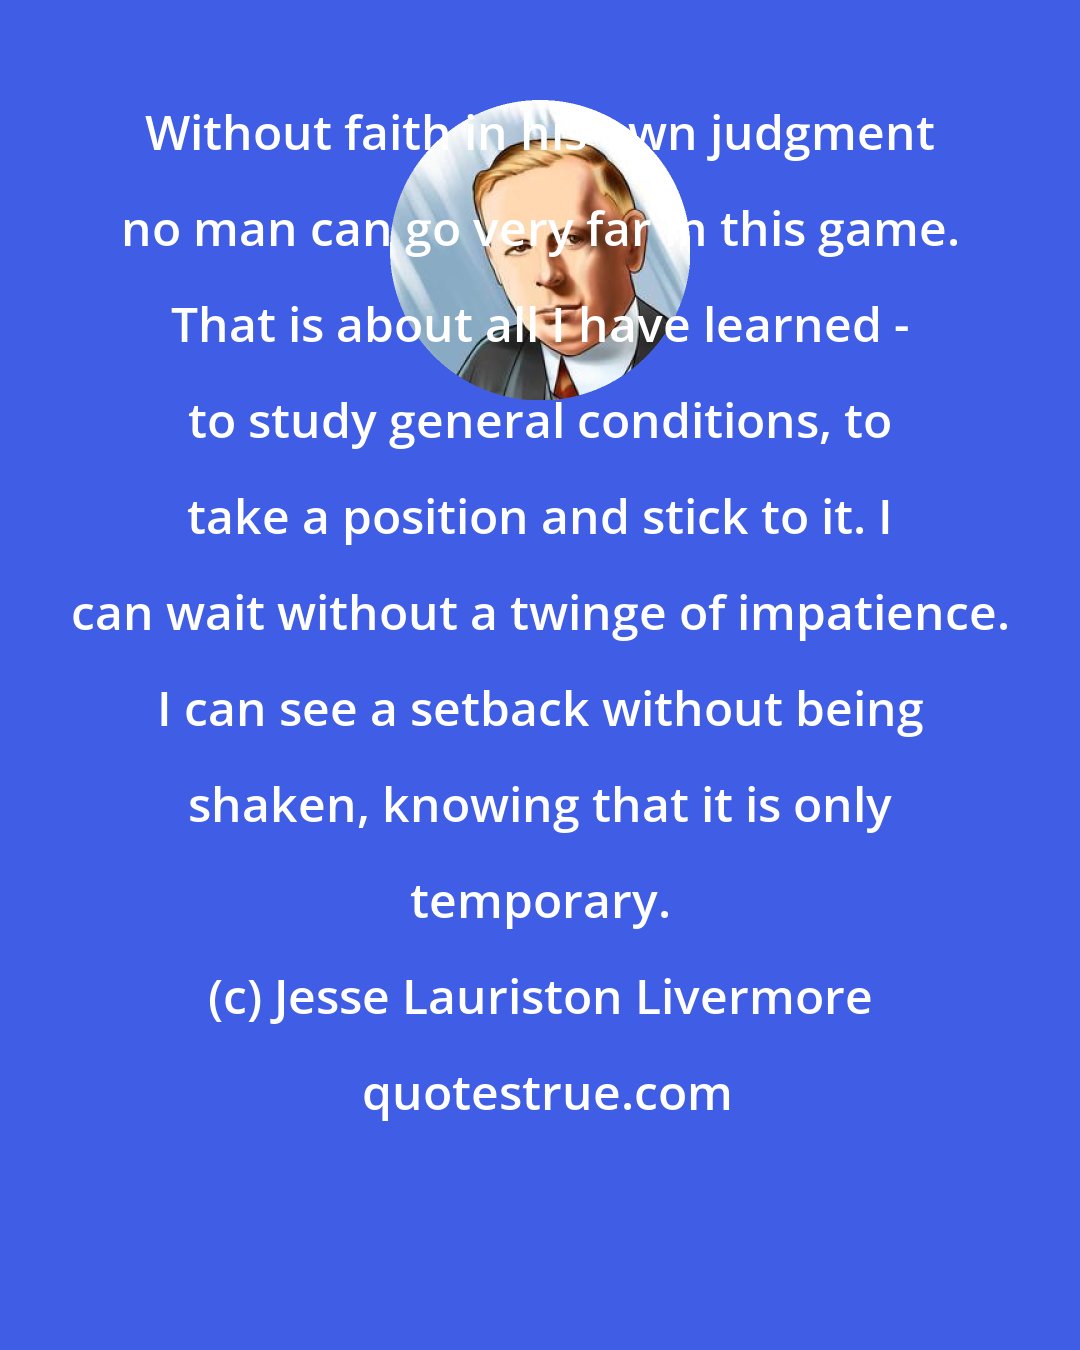 Jesse Lauriston Livermore: Without faith in his own judgment no man can go very far in this game. That is about all I have learned - to study general conditions, to take a position and stick to it. I can wait without a twinge of impatience. I can see a setback without being shaken, knowing that it is only temporary.